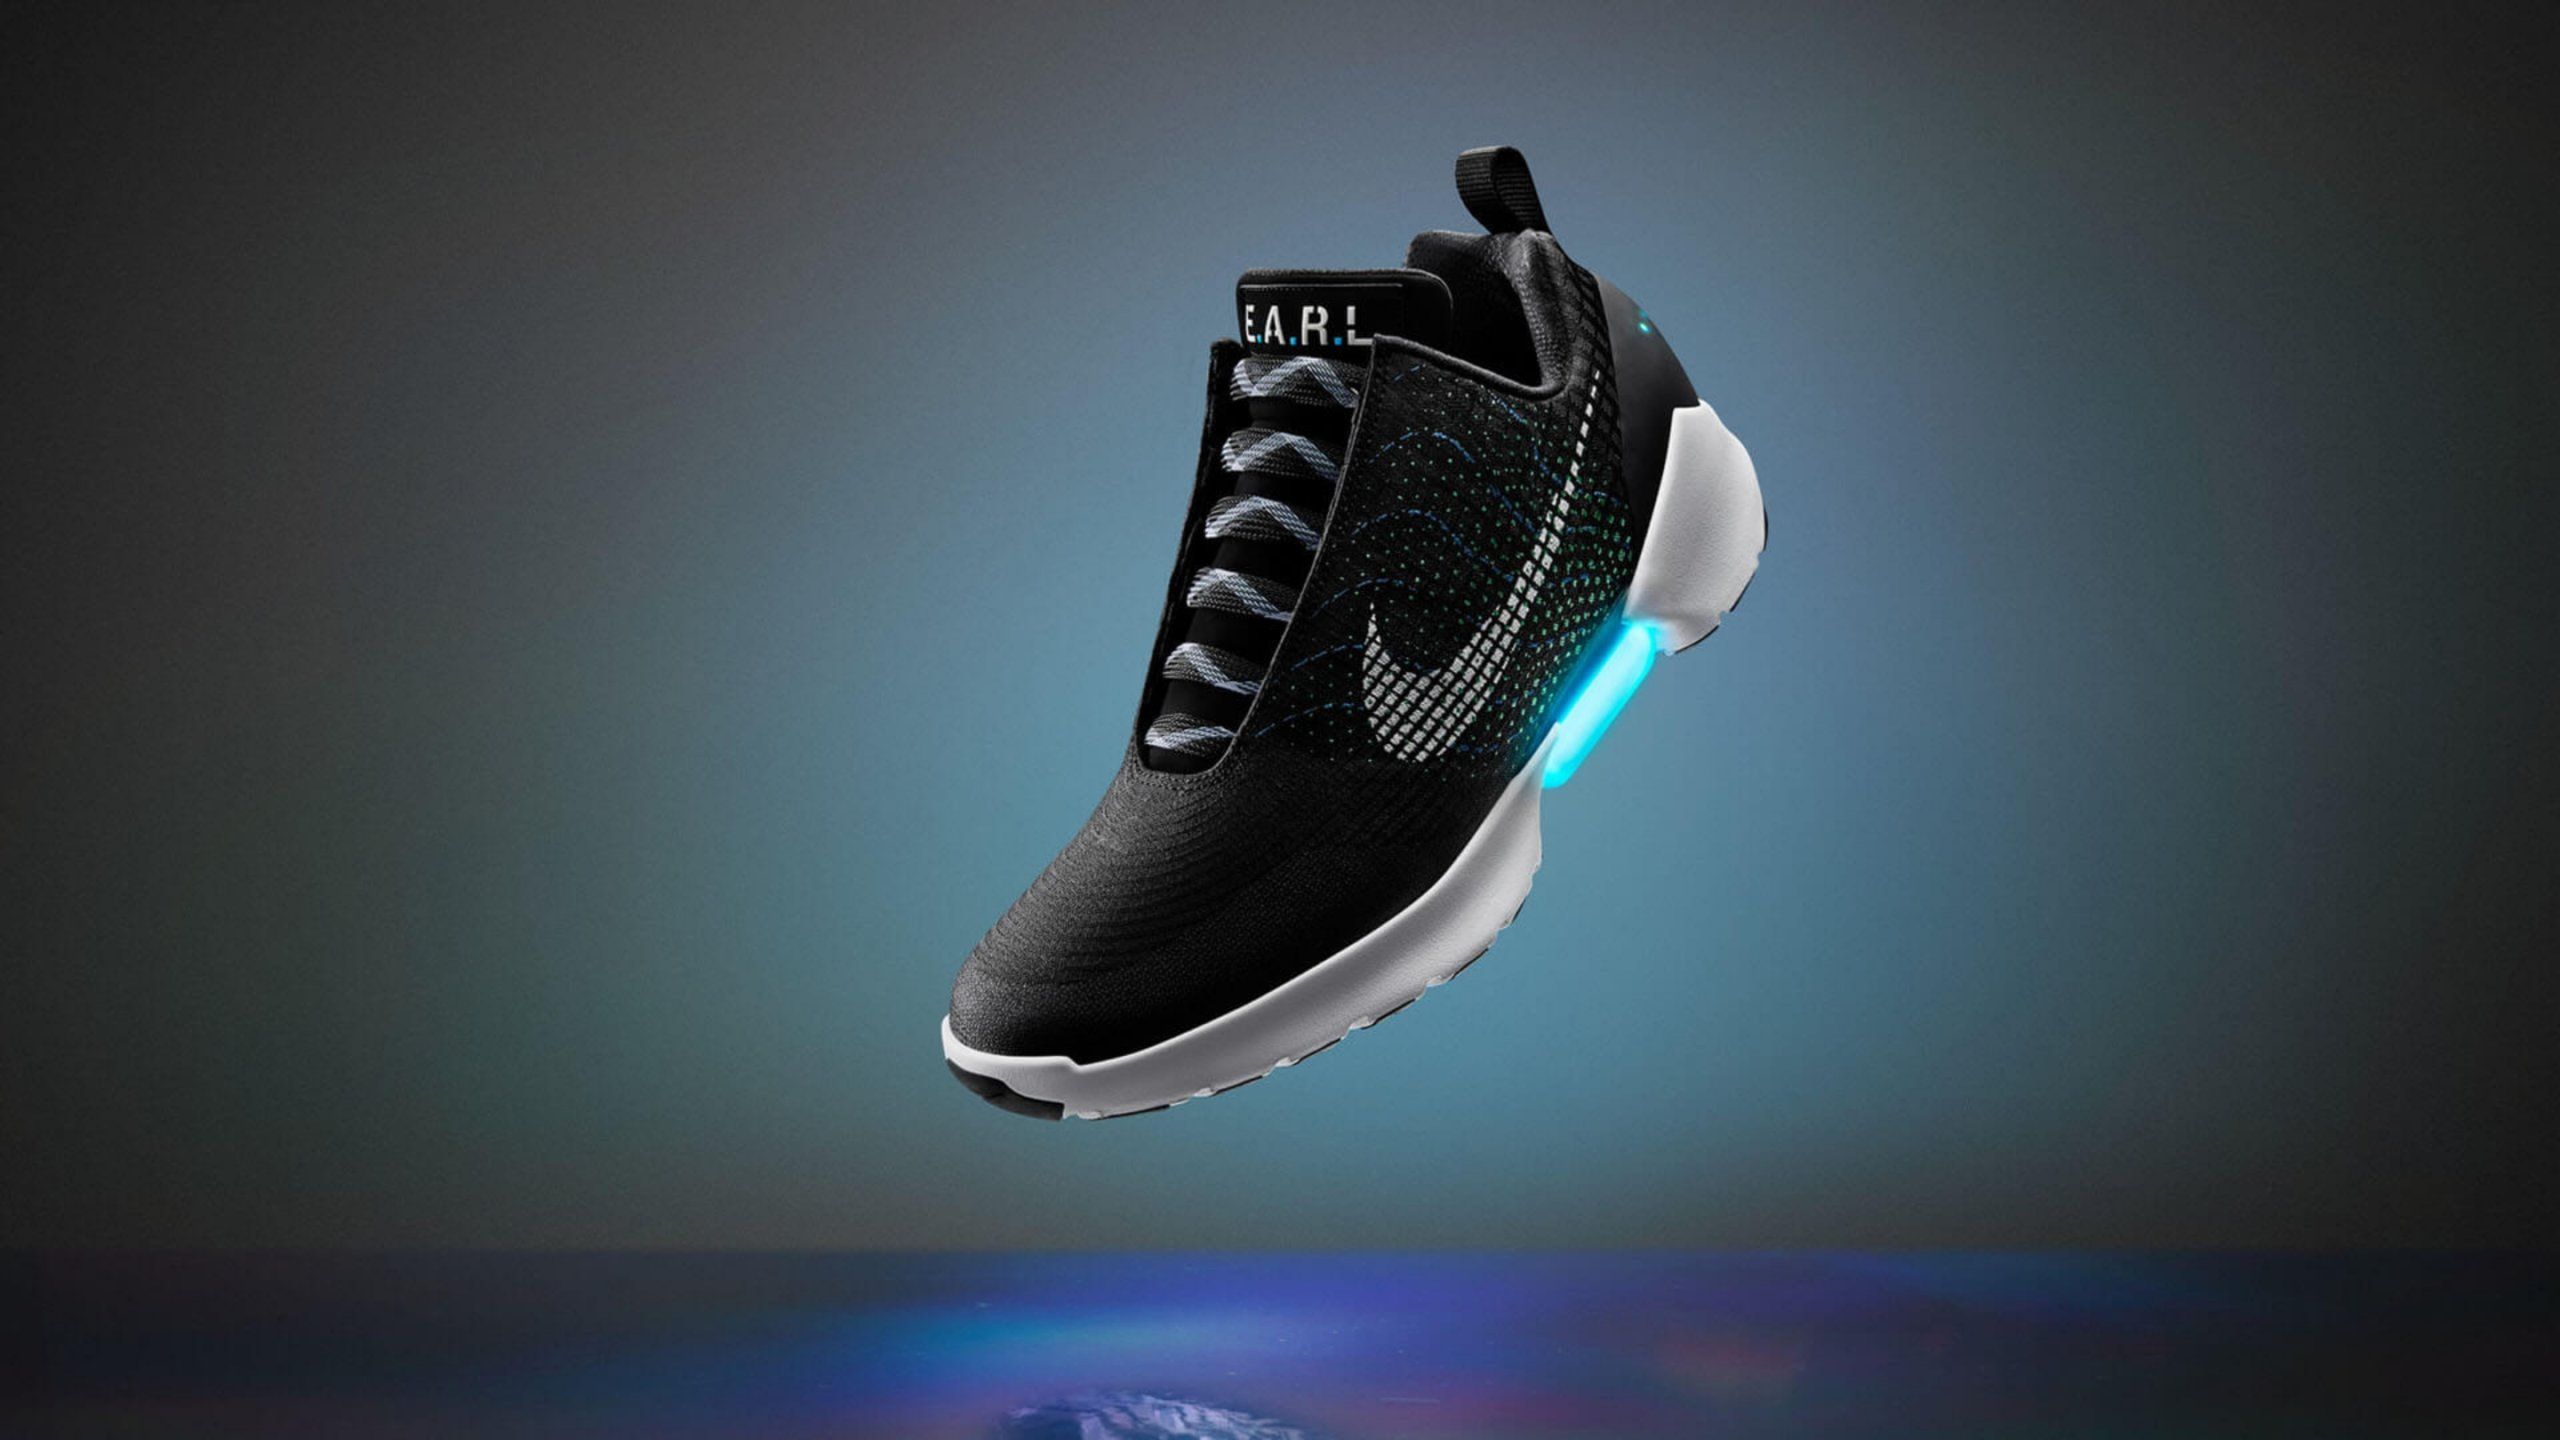 Nike Hyper Adapt in black colorway suspended in air with light up arch